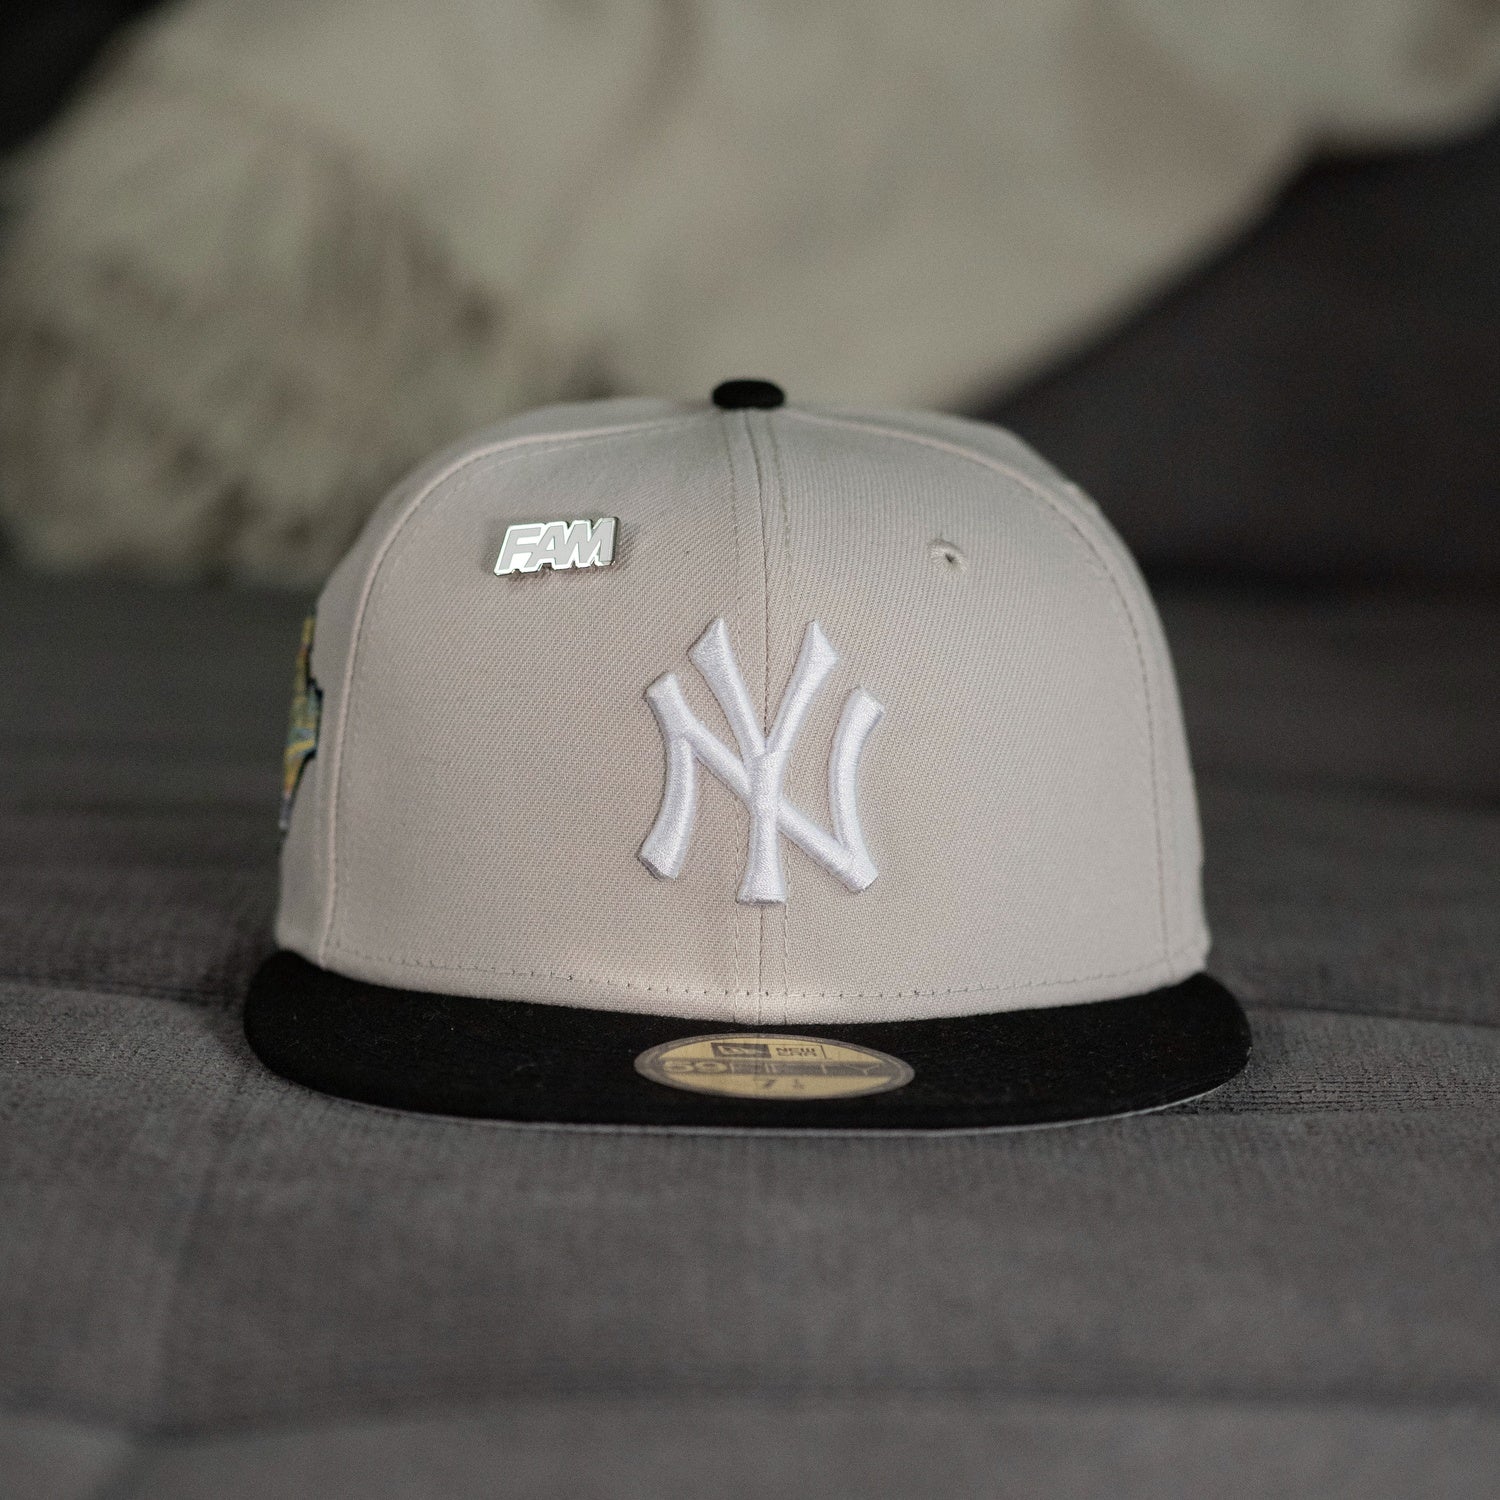 NEW ERA 59FIFTY MLB NEW YORK YANKEES WORLD SERIES 1996 TWO TONE / GREY UV FITTED CAP